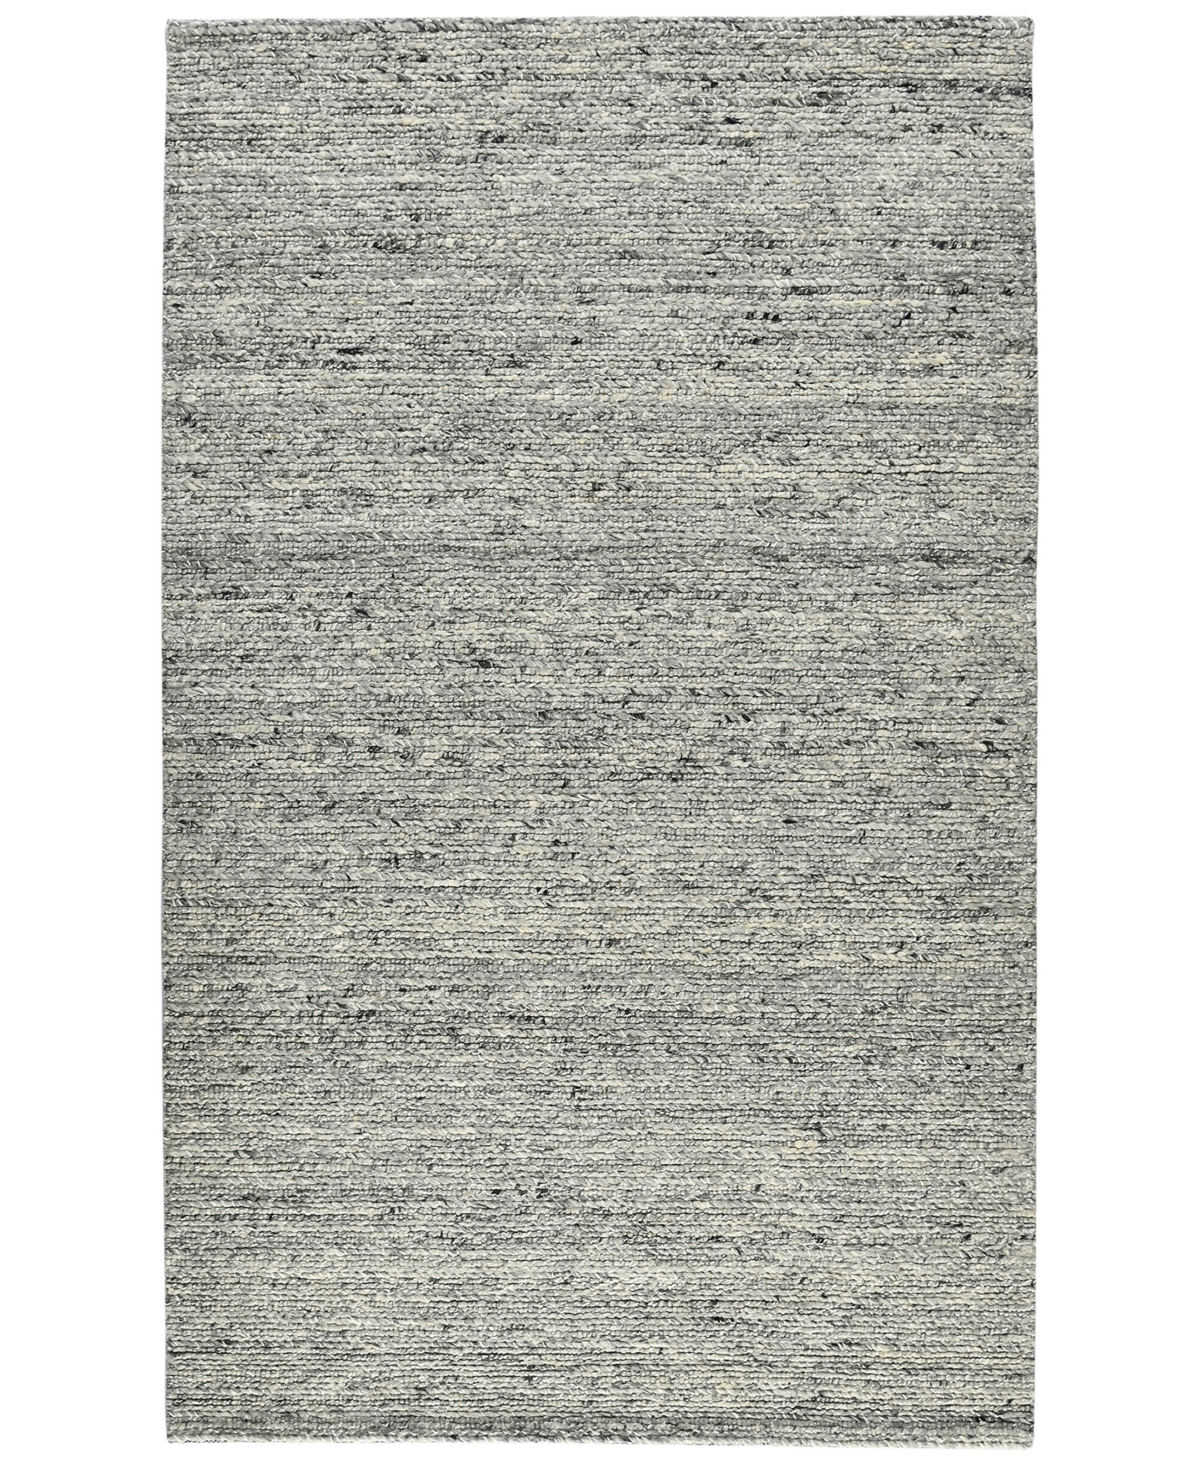 Amer Rugs Norwood Nor2 Area Rug In Ivory